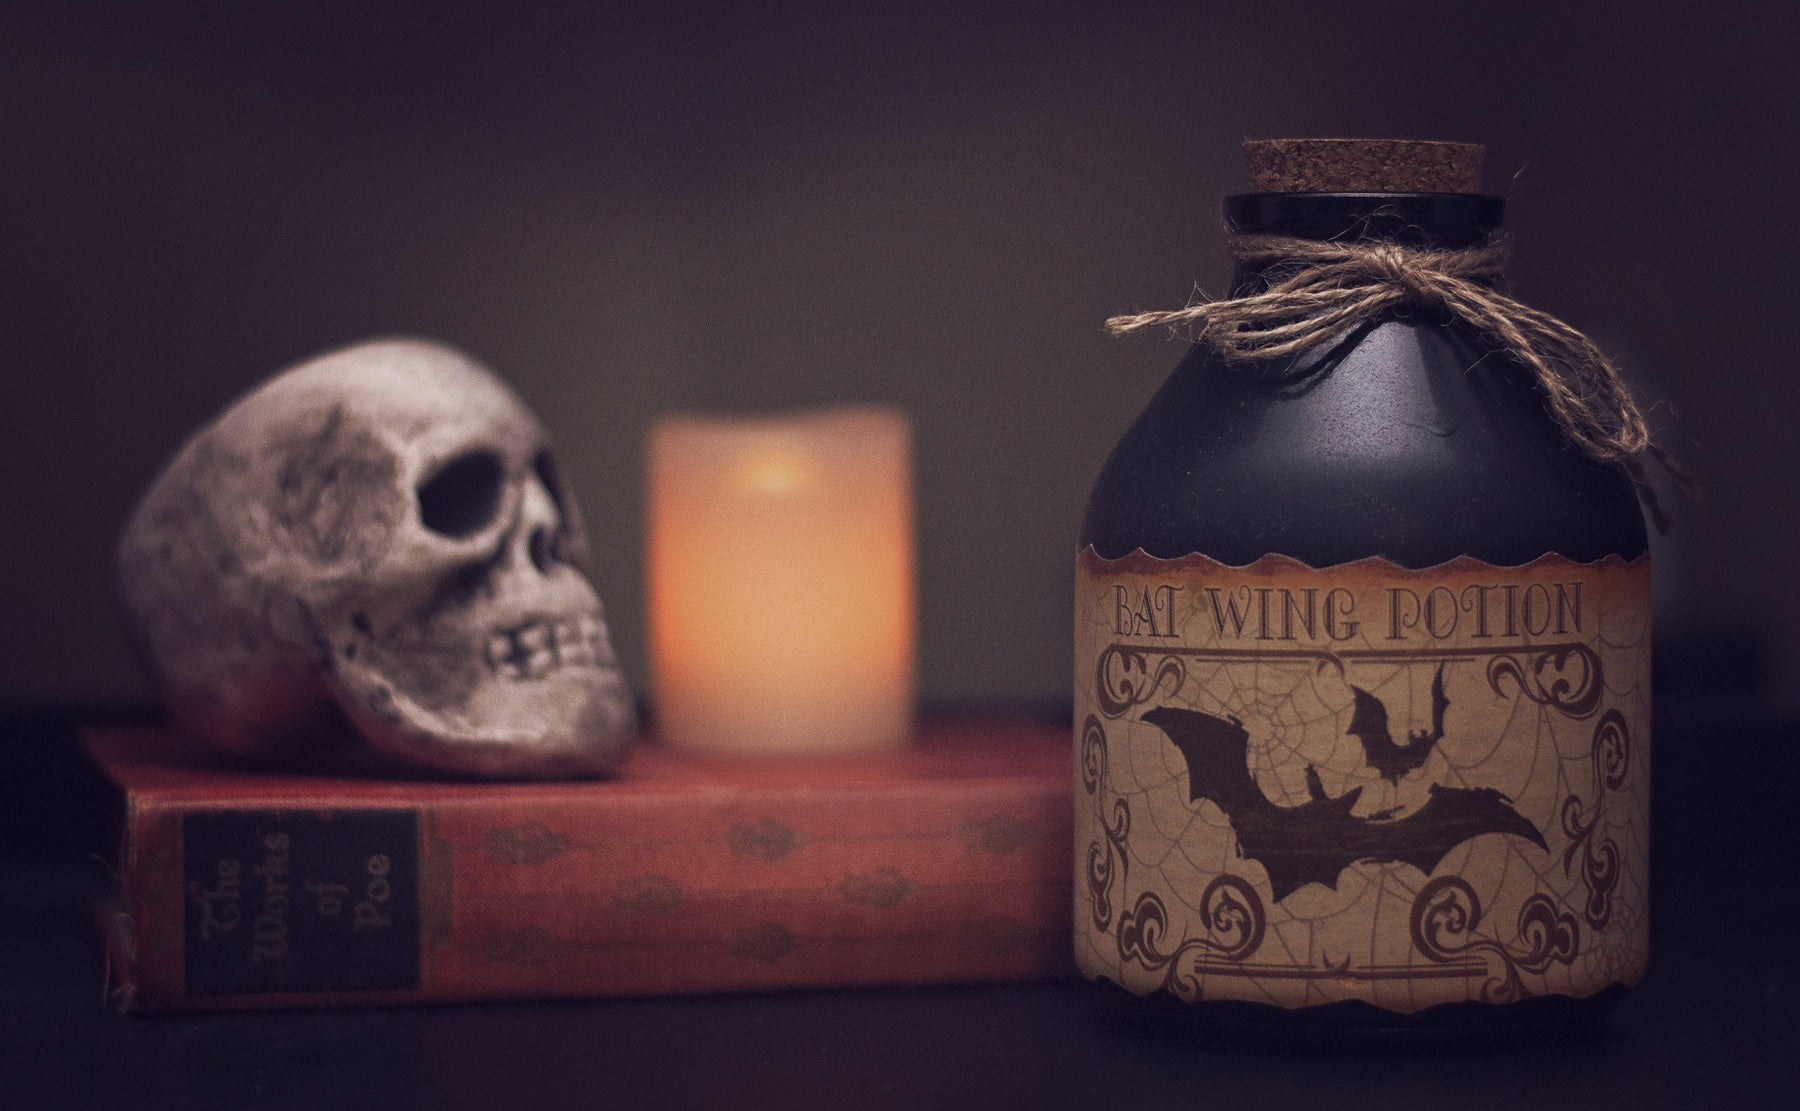 HERE’S WHAT WITCHES ACTUALLY DO ON HALLOWEEN